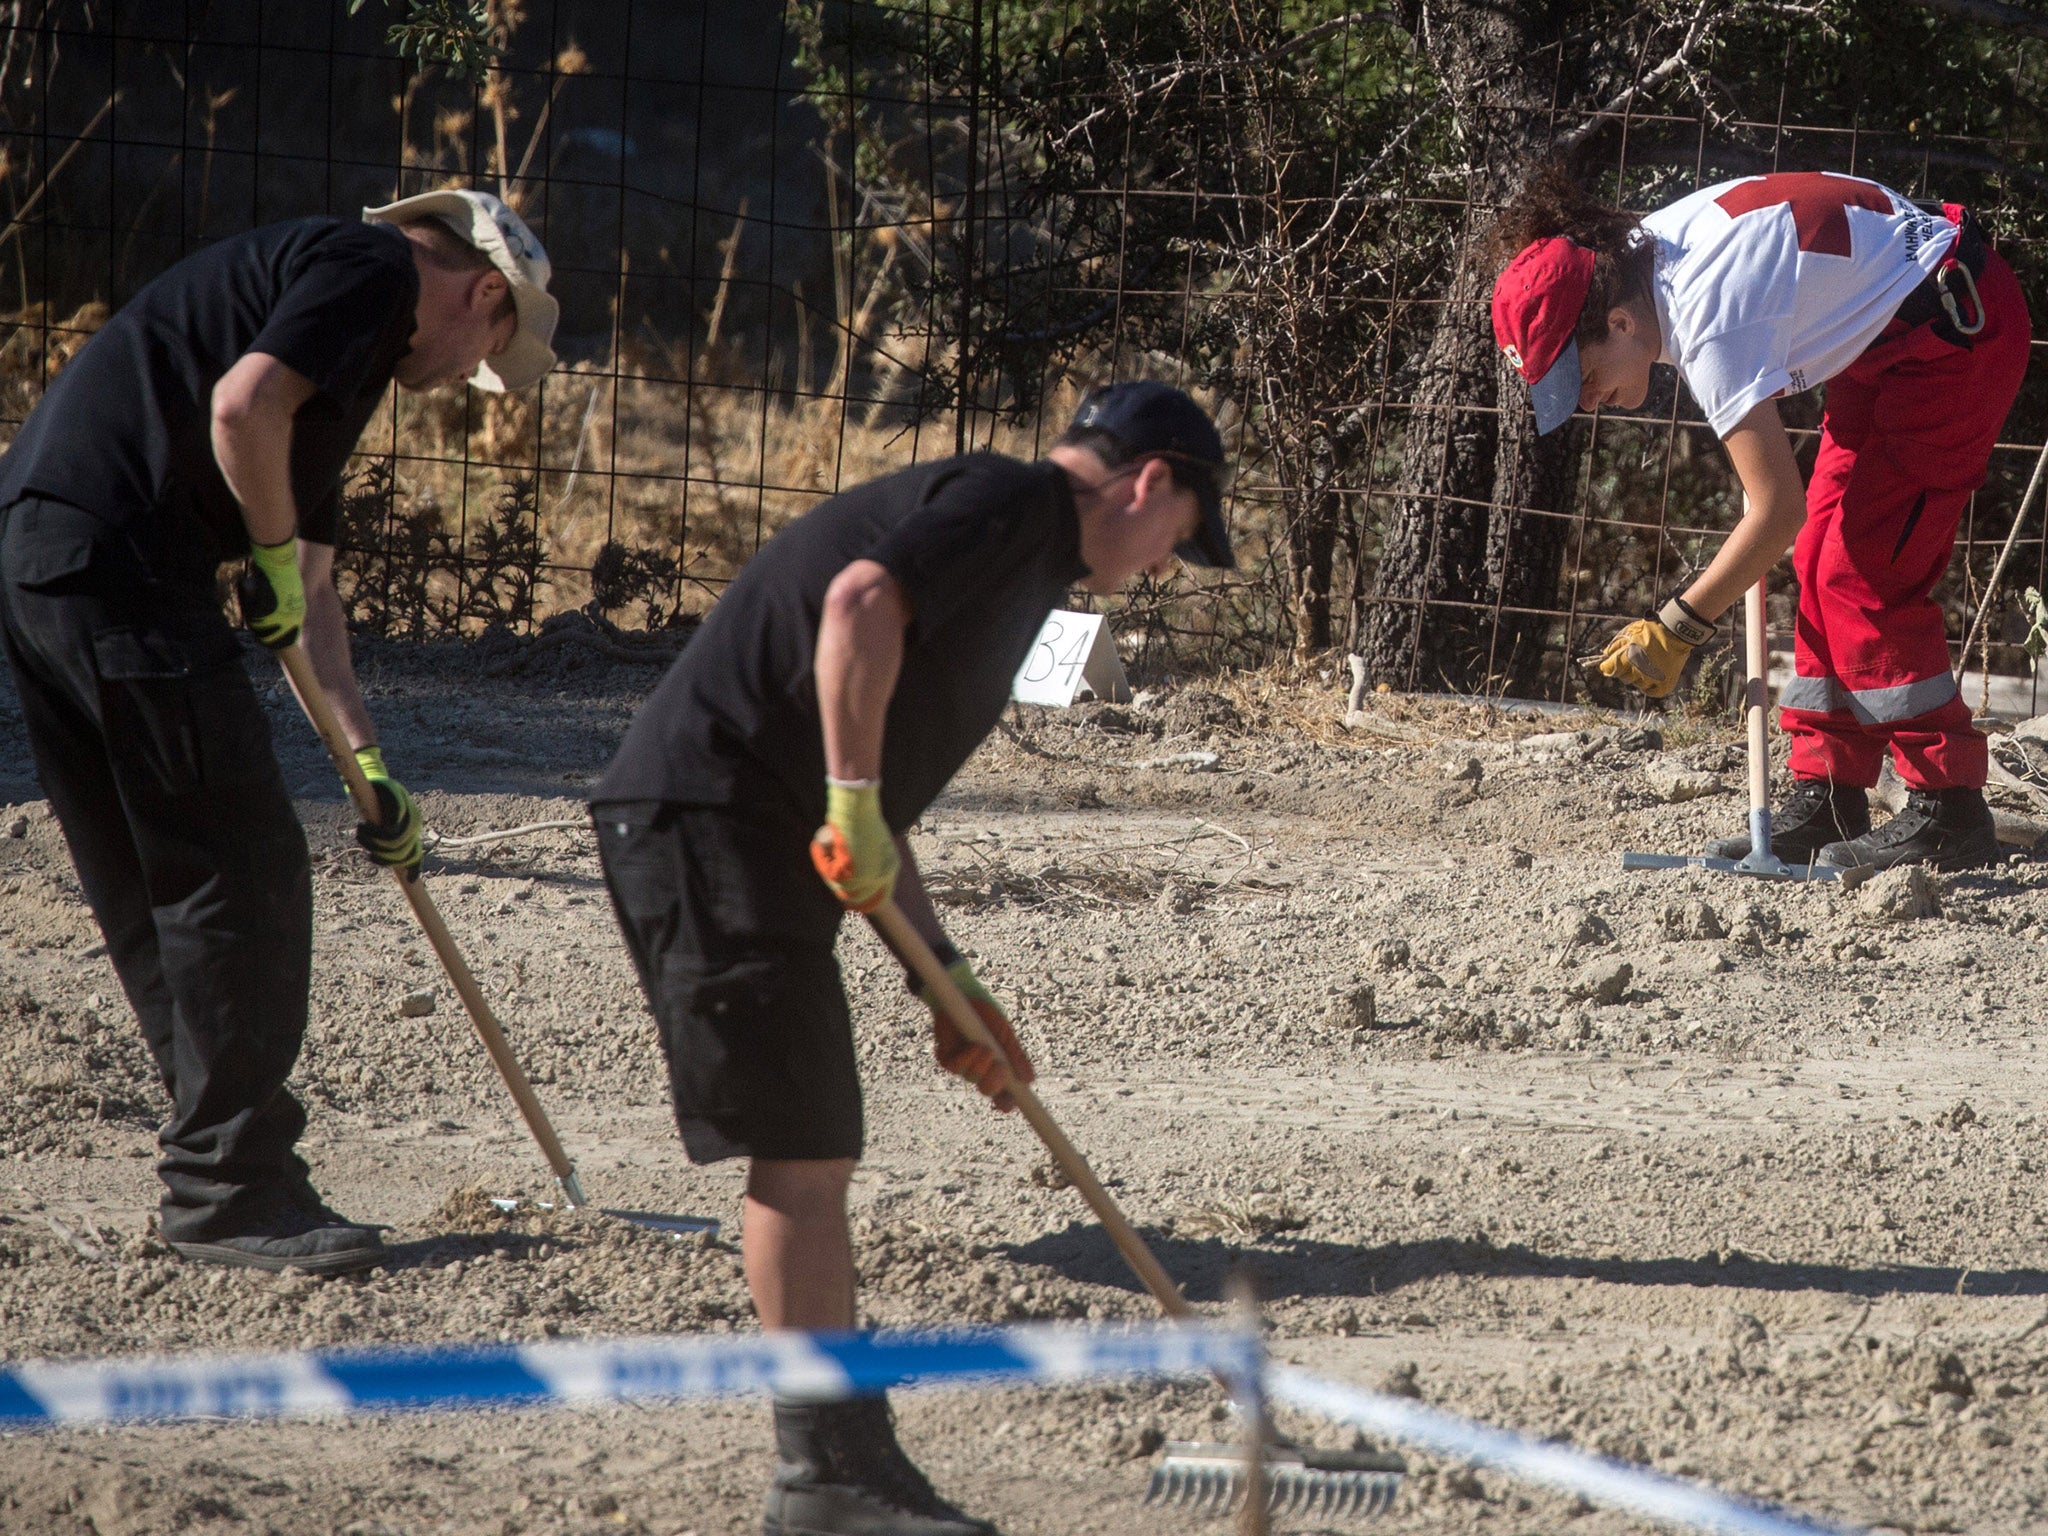 South Yorkshire Police and members of the Greek rescue service excavate a site in search of missing toddler Ben Needham